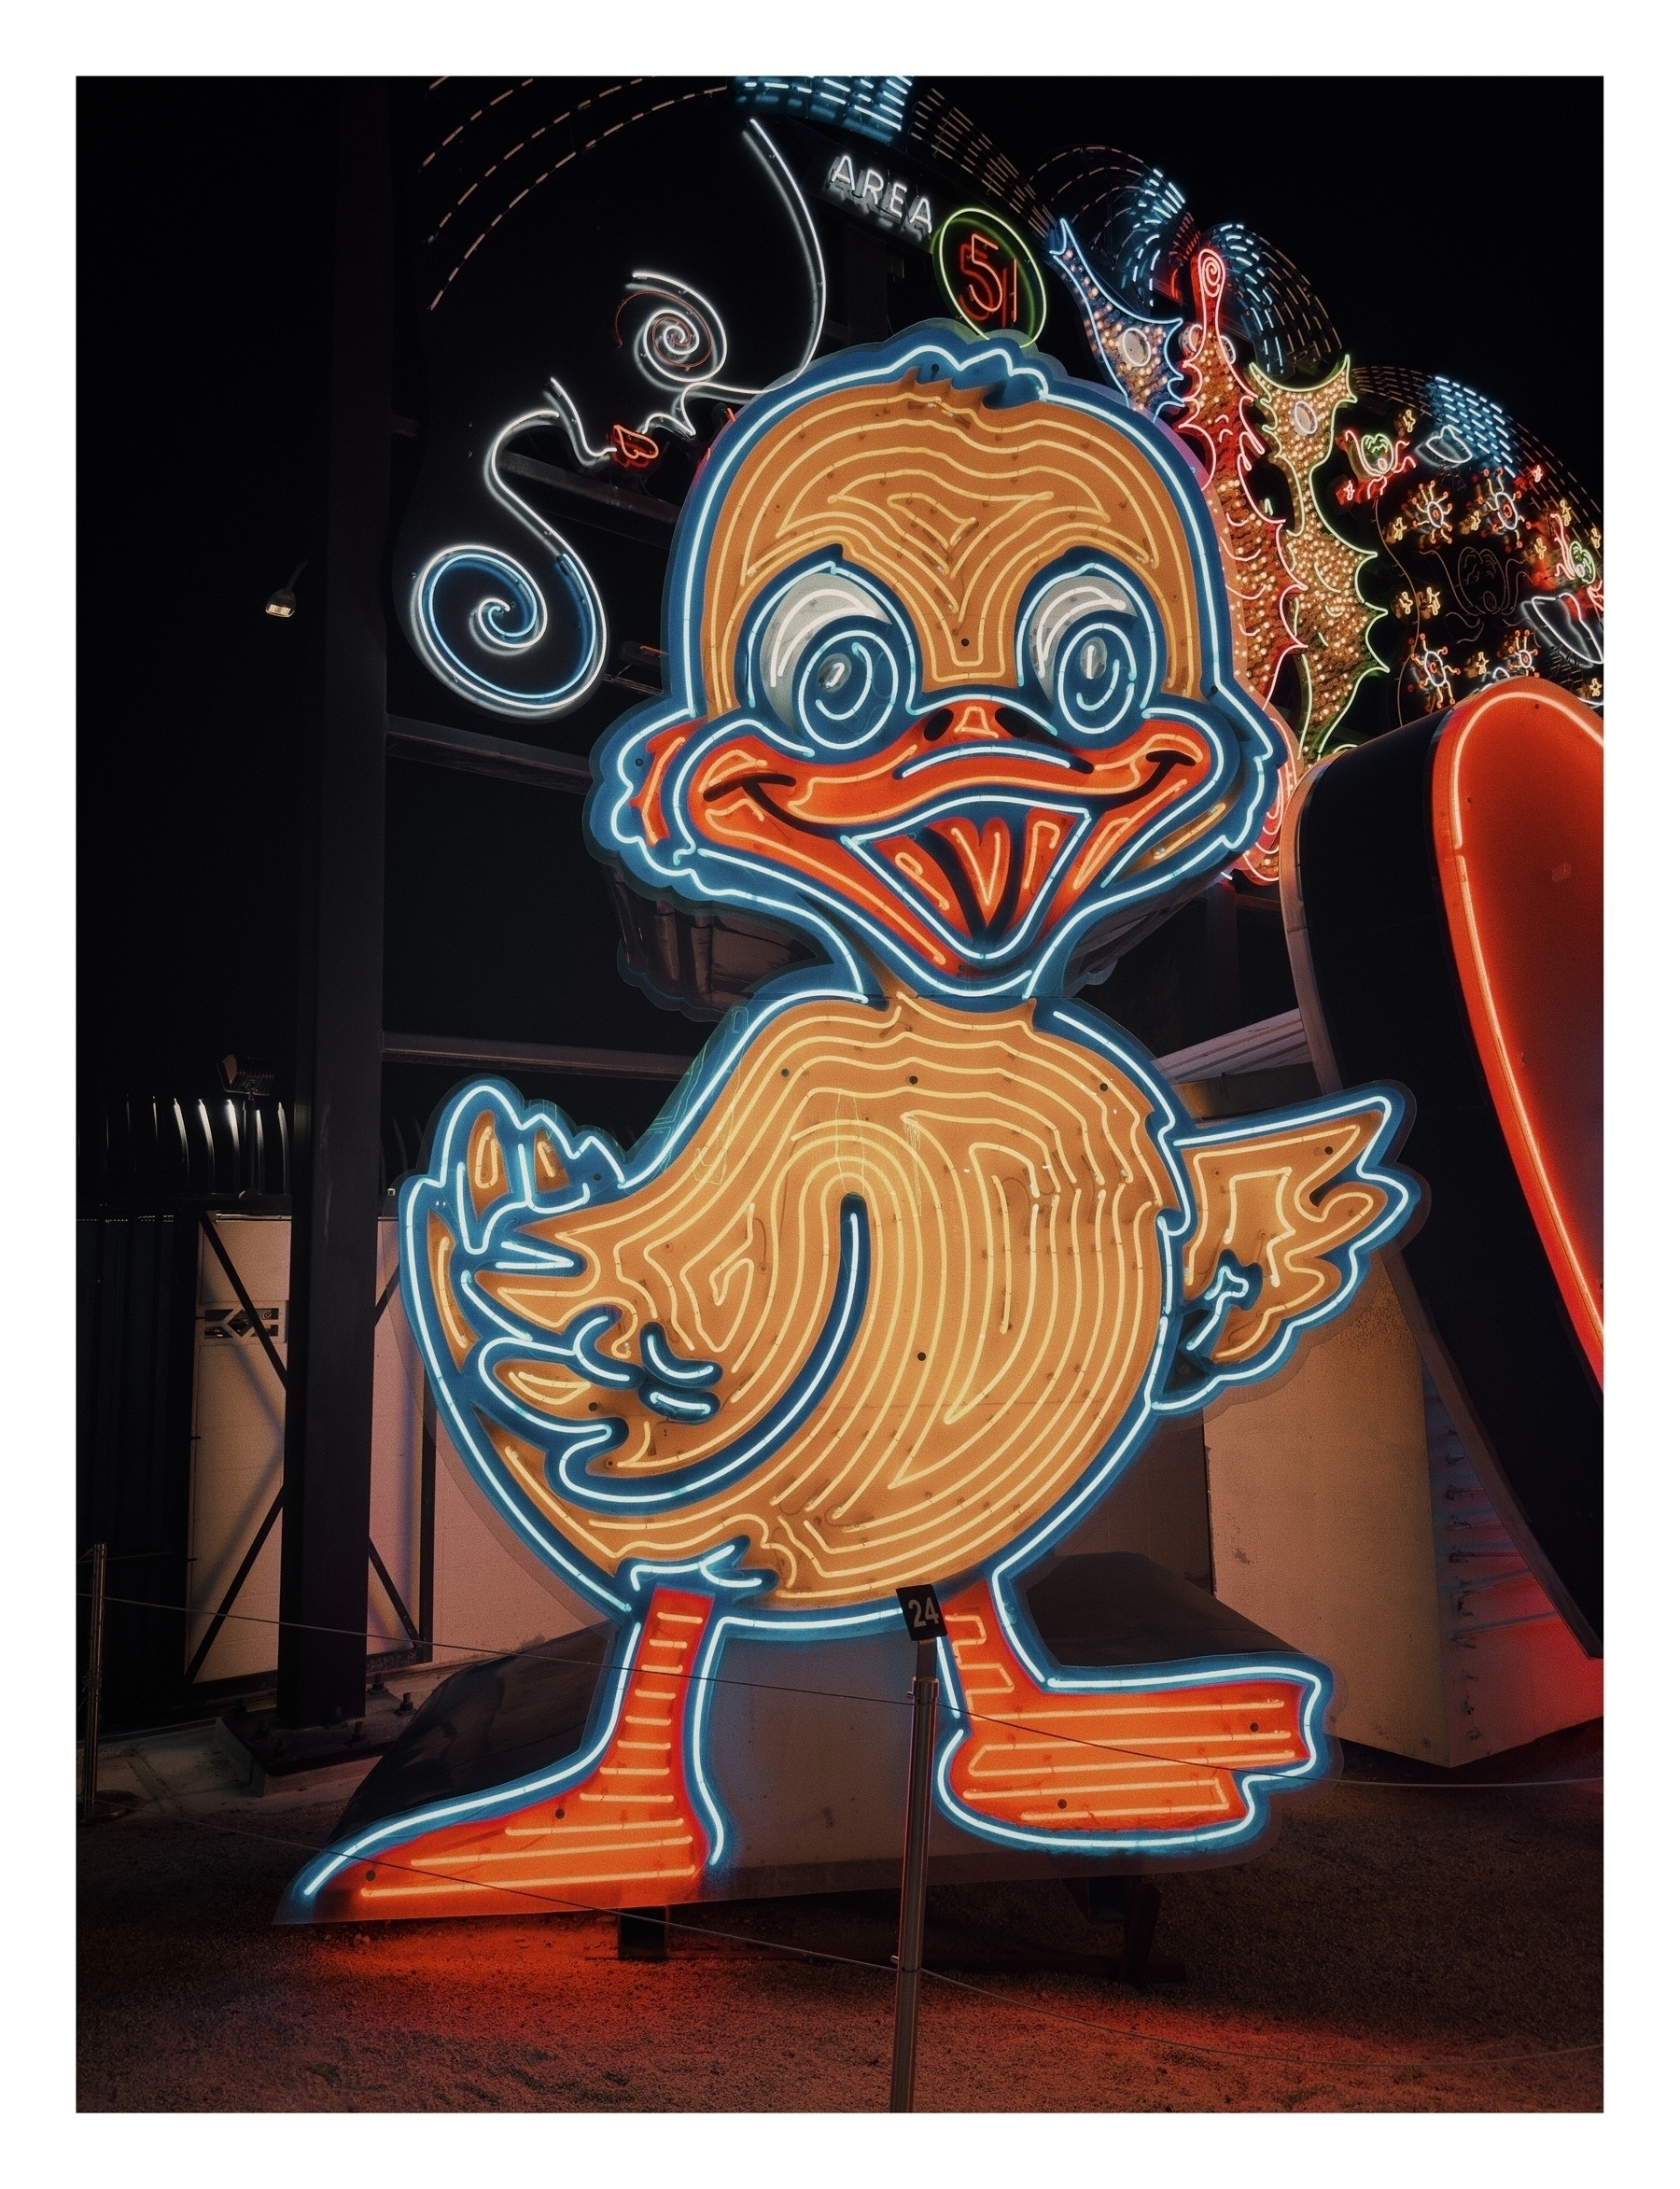 A neon-lit duck sign stands illuminated at night, providing a whimsical touch to a dark amusement park setting. No text visible.